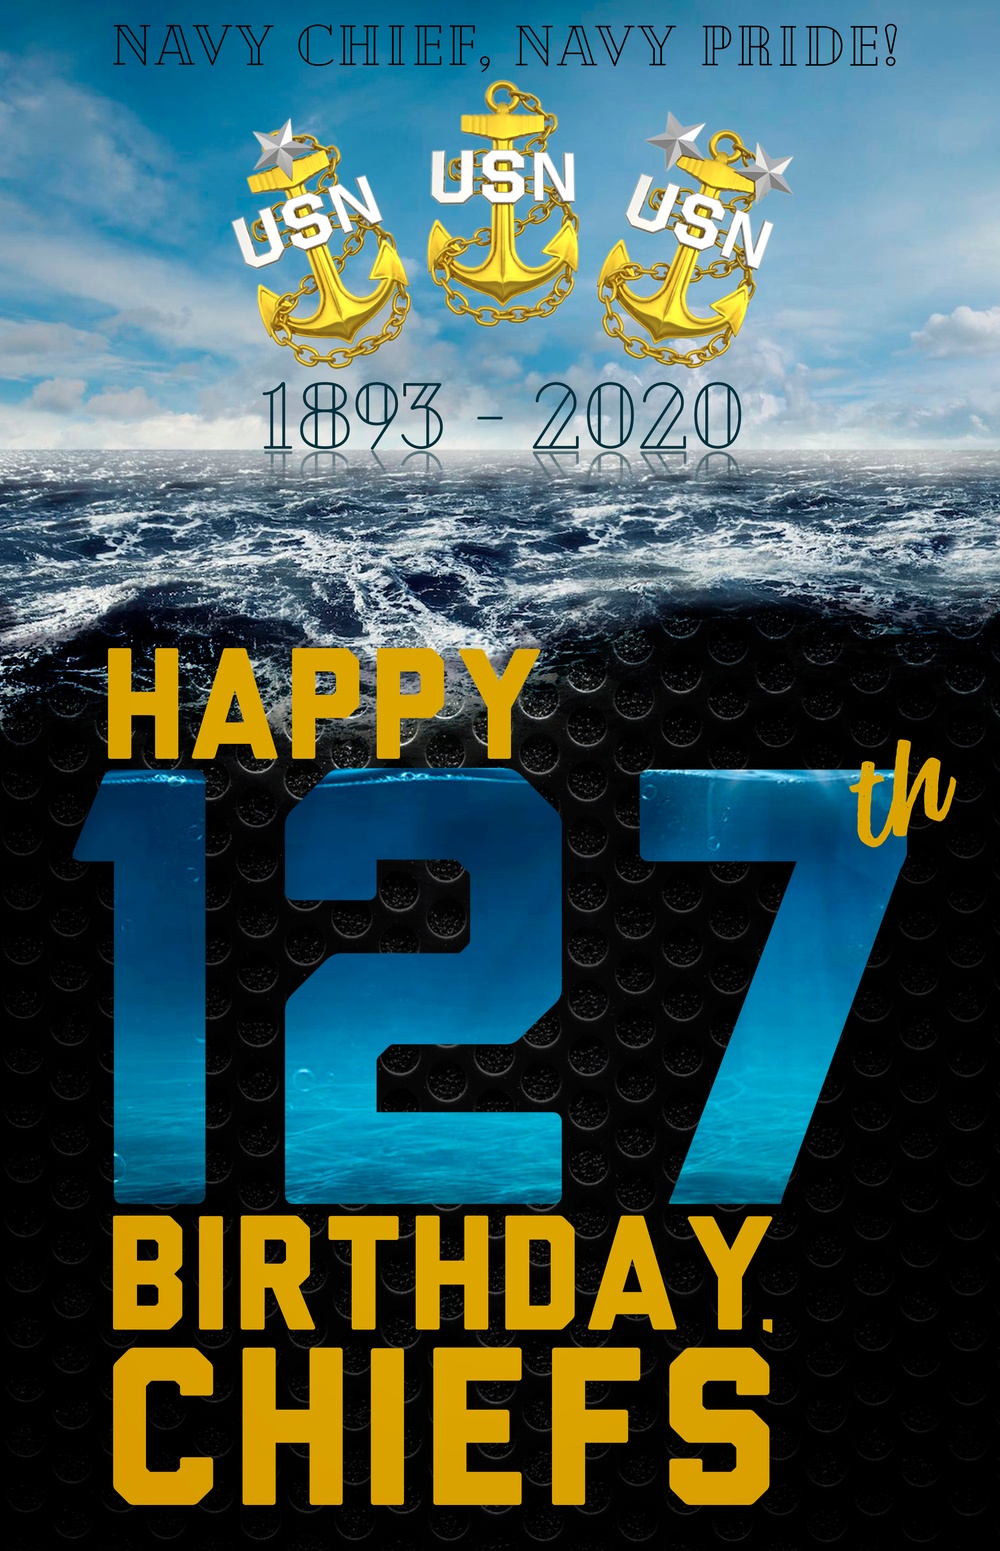 Chief Petty Officers 127th Birthday